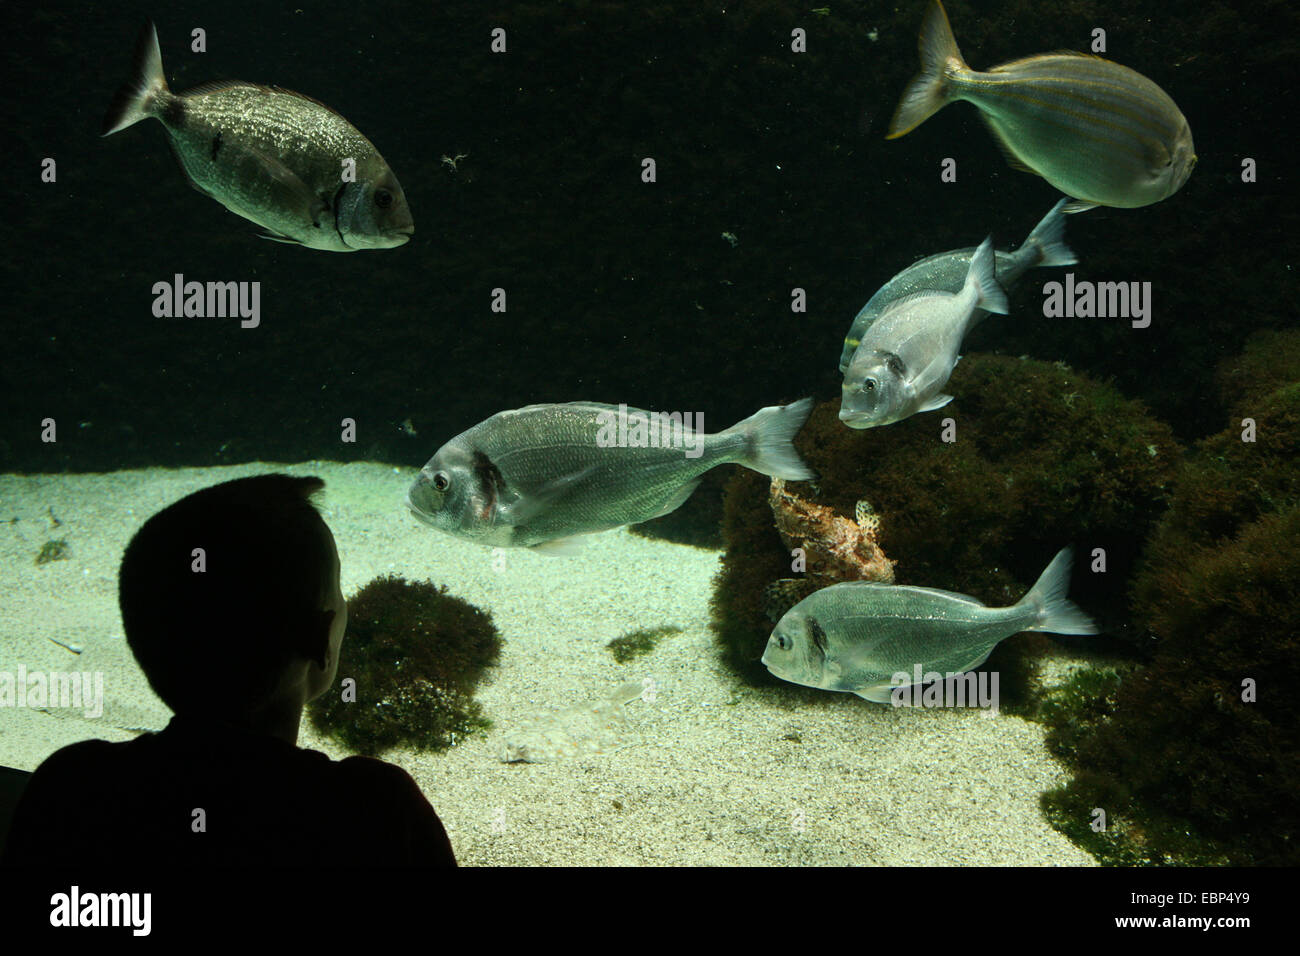 Young boy examines an aquarium with school of salema porgy fishes (Sarpa salpa) at Zoo Basel, Switzerland. Stock Photo